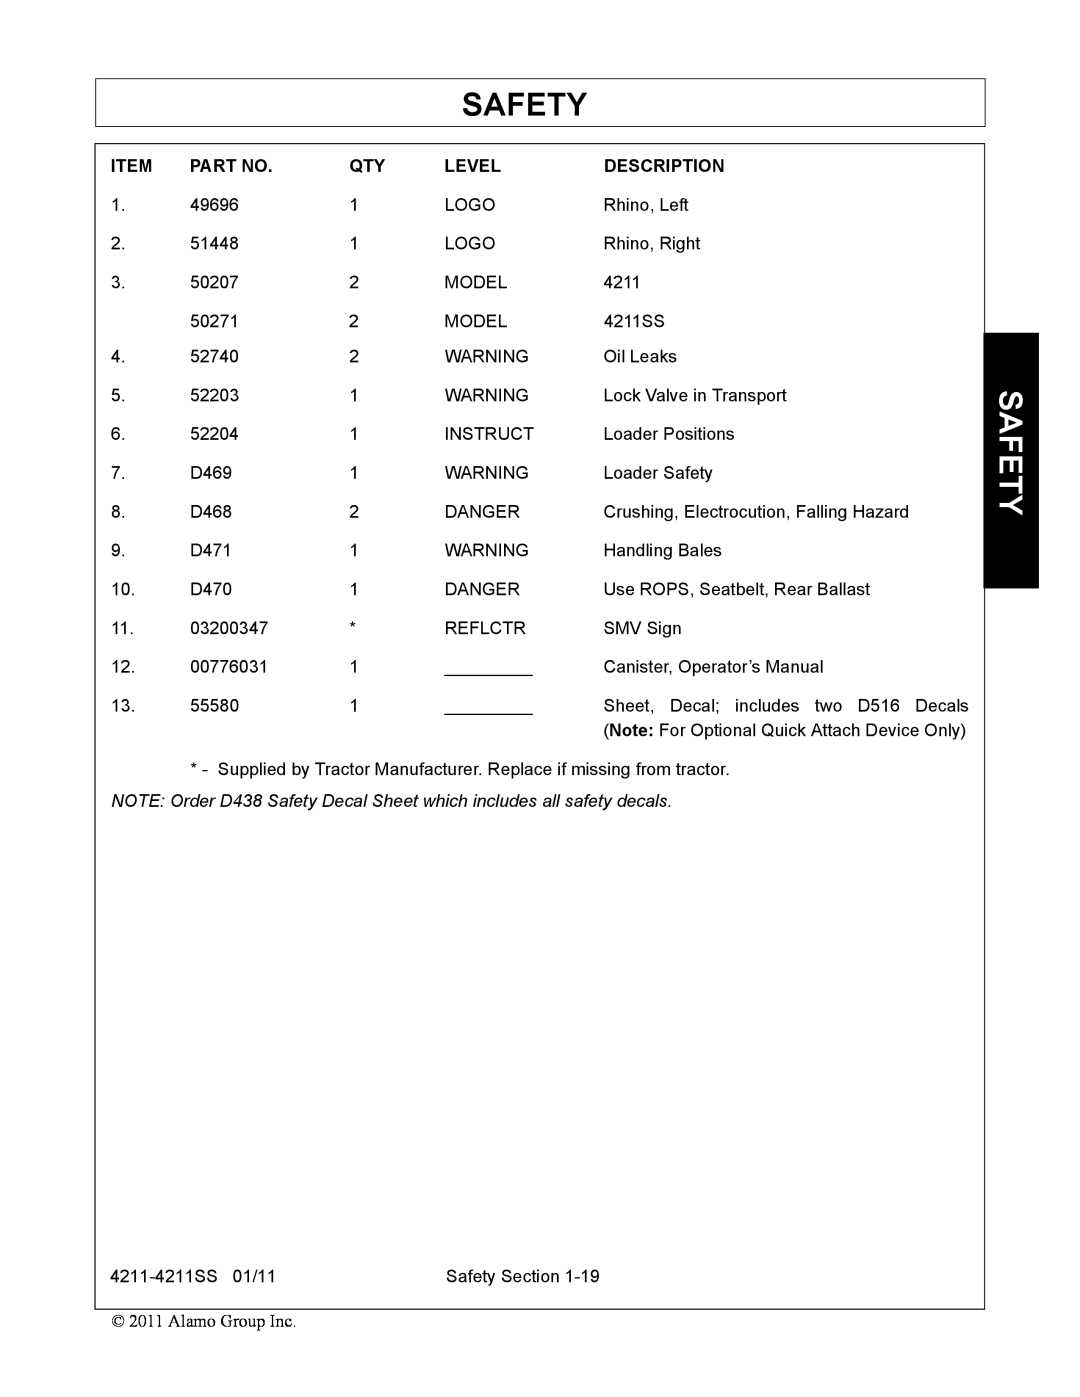 Servis-Rhino 4211SS manual Level, Description, NOTE Order D438 Safety Decal Sheet which includes all safety decals 